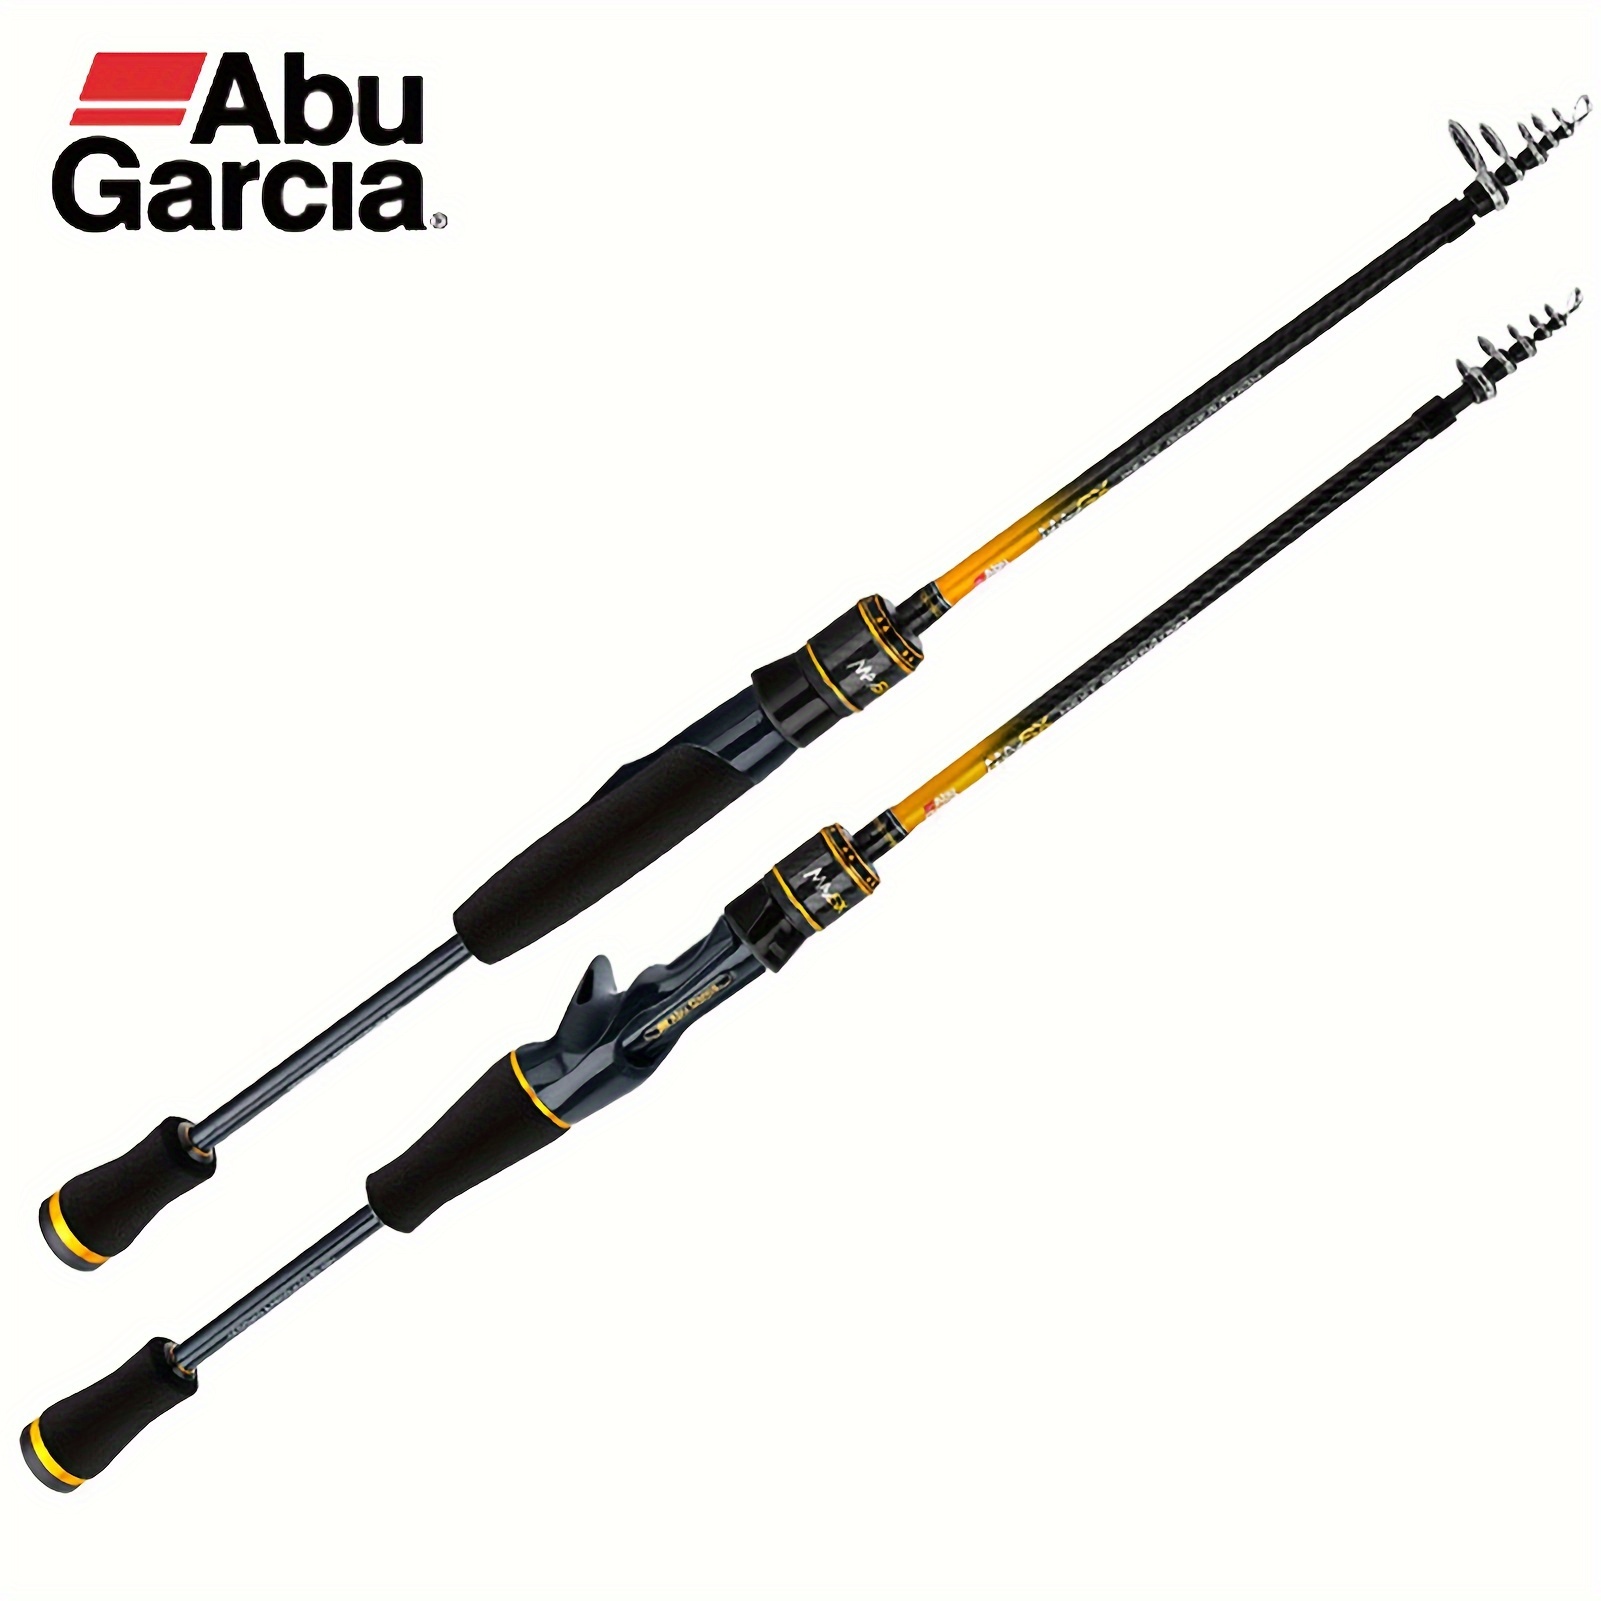 Abu Garcia Vendetta ⅱ 2-sections Spinning/casting Fishing Rod, Long-shot  Universal Fishing Pole With Eva Cork Handle, Suitable For Freshwater  Saltwater, Check Out Today's Deals Now